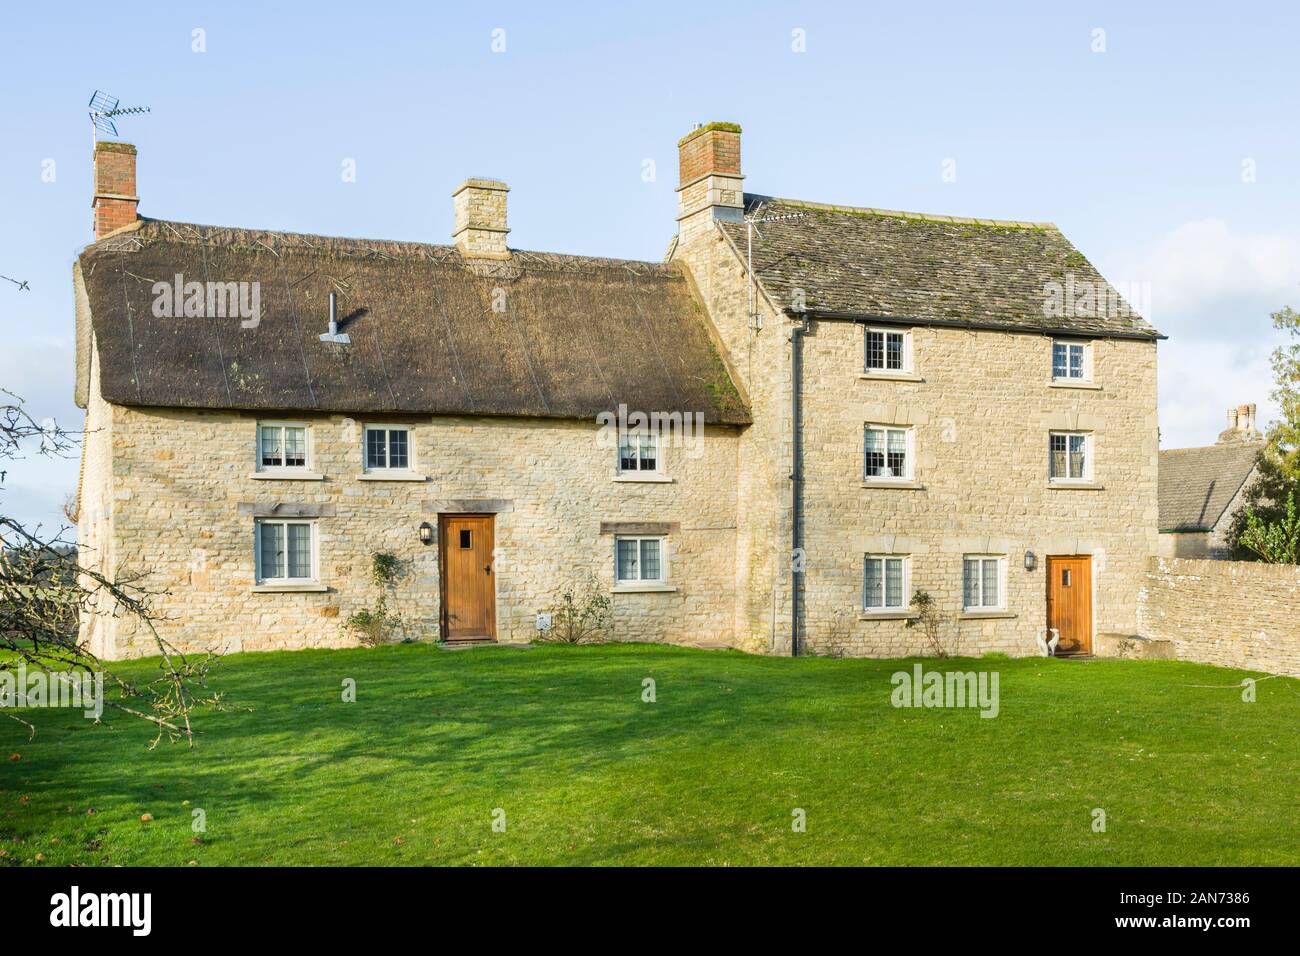 OXFORD, UK - January 03, 2020. Exterior of a large thatched Cotswold stone cottage in Oxfordshire, UK Stock Photo